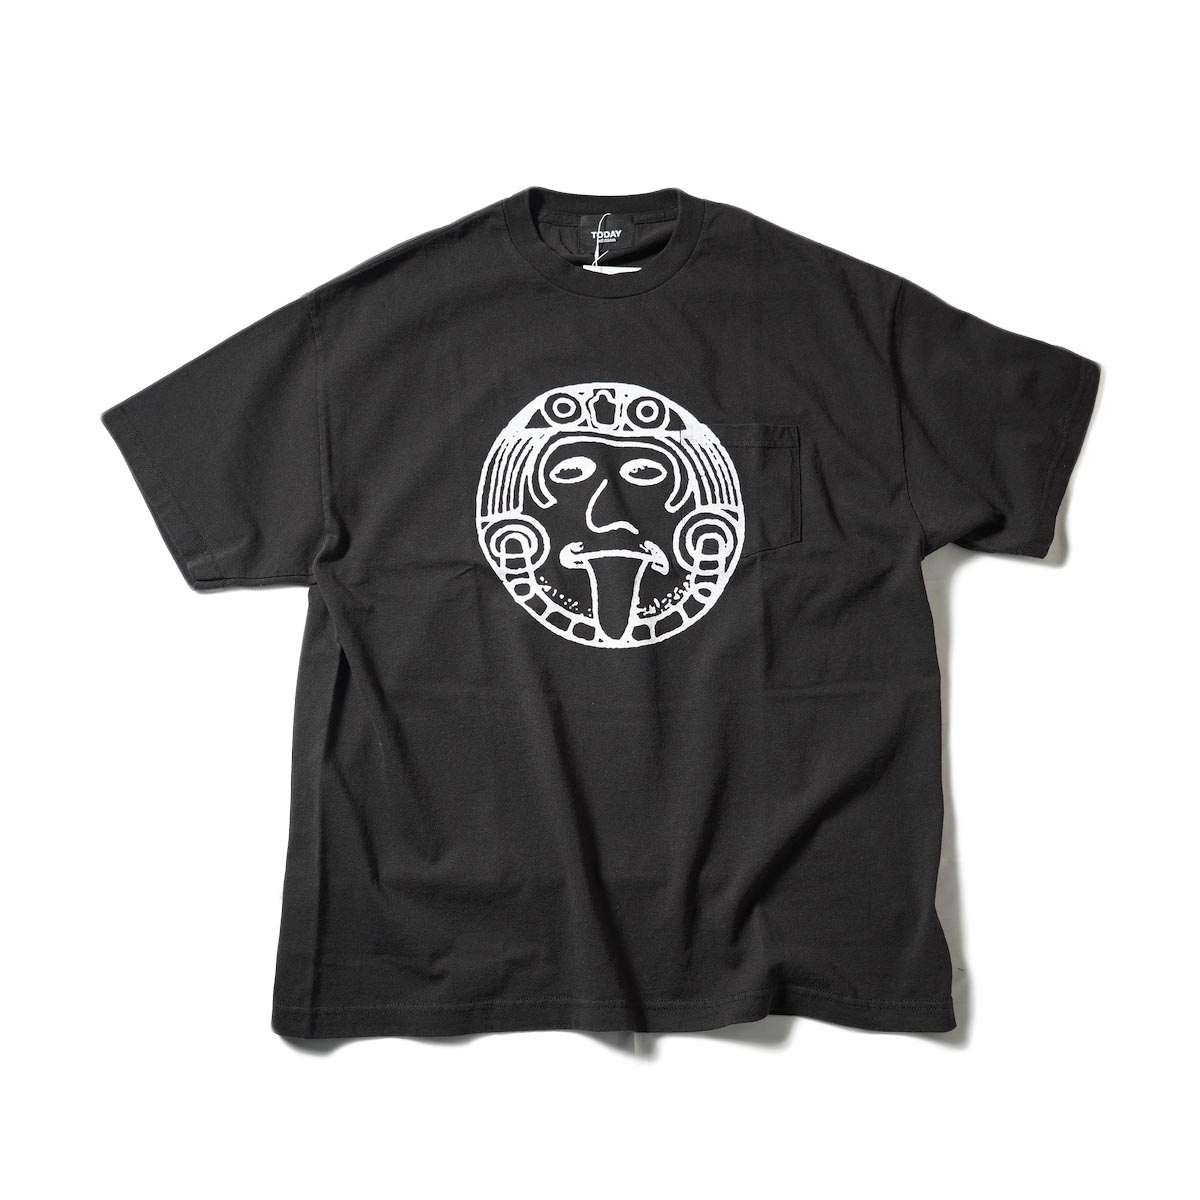 TODAY edition / Flux SS Tee (Black)